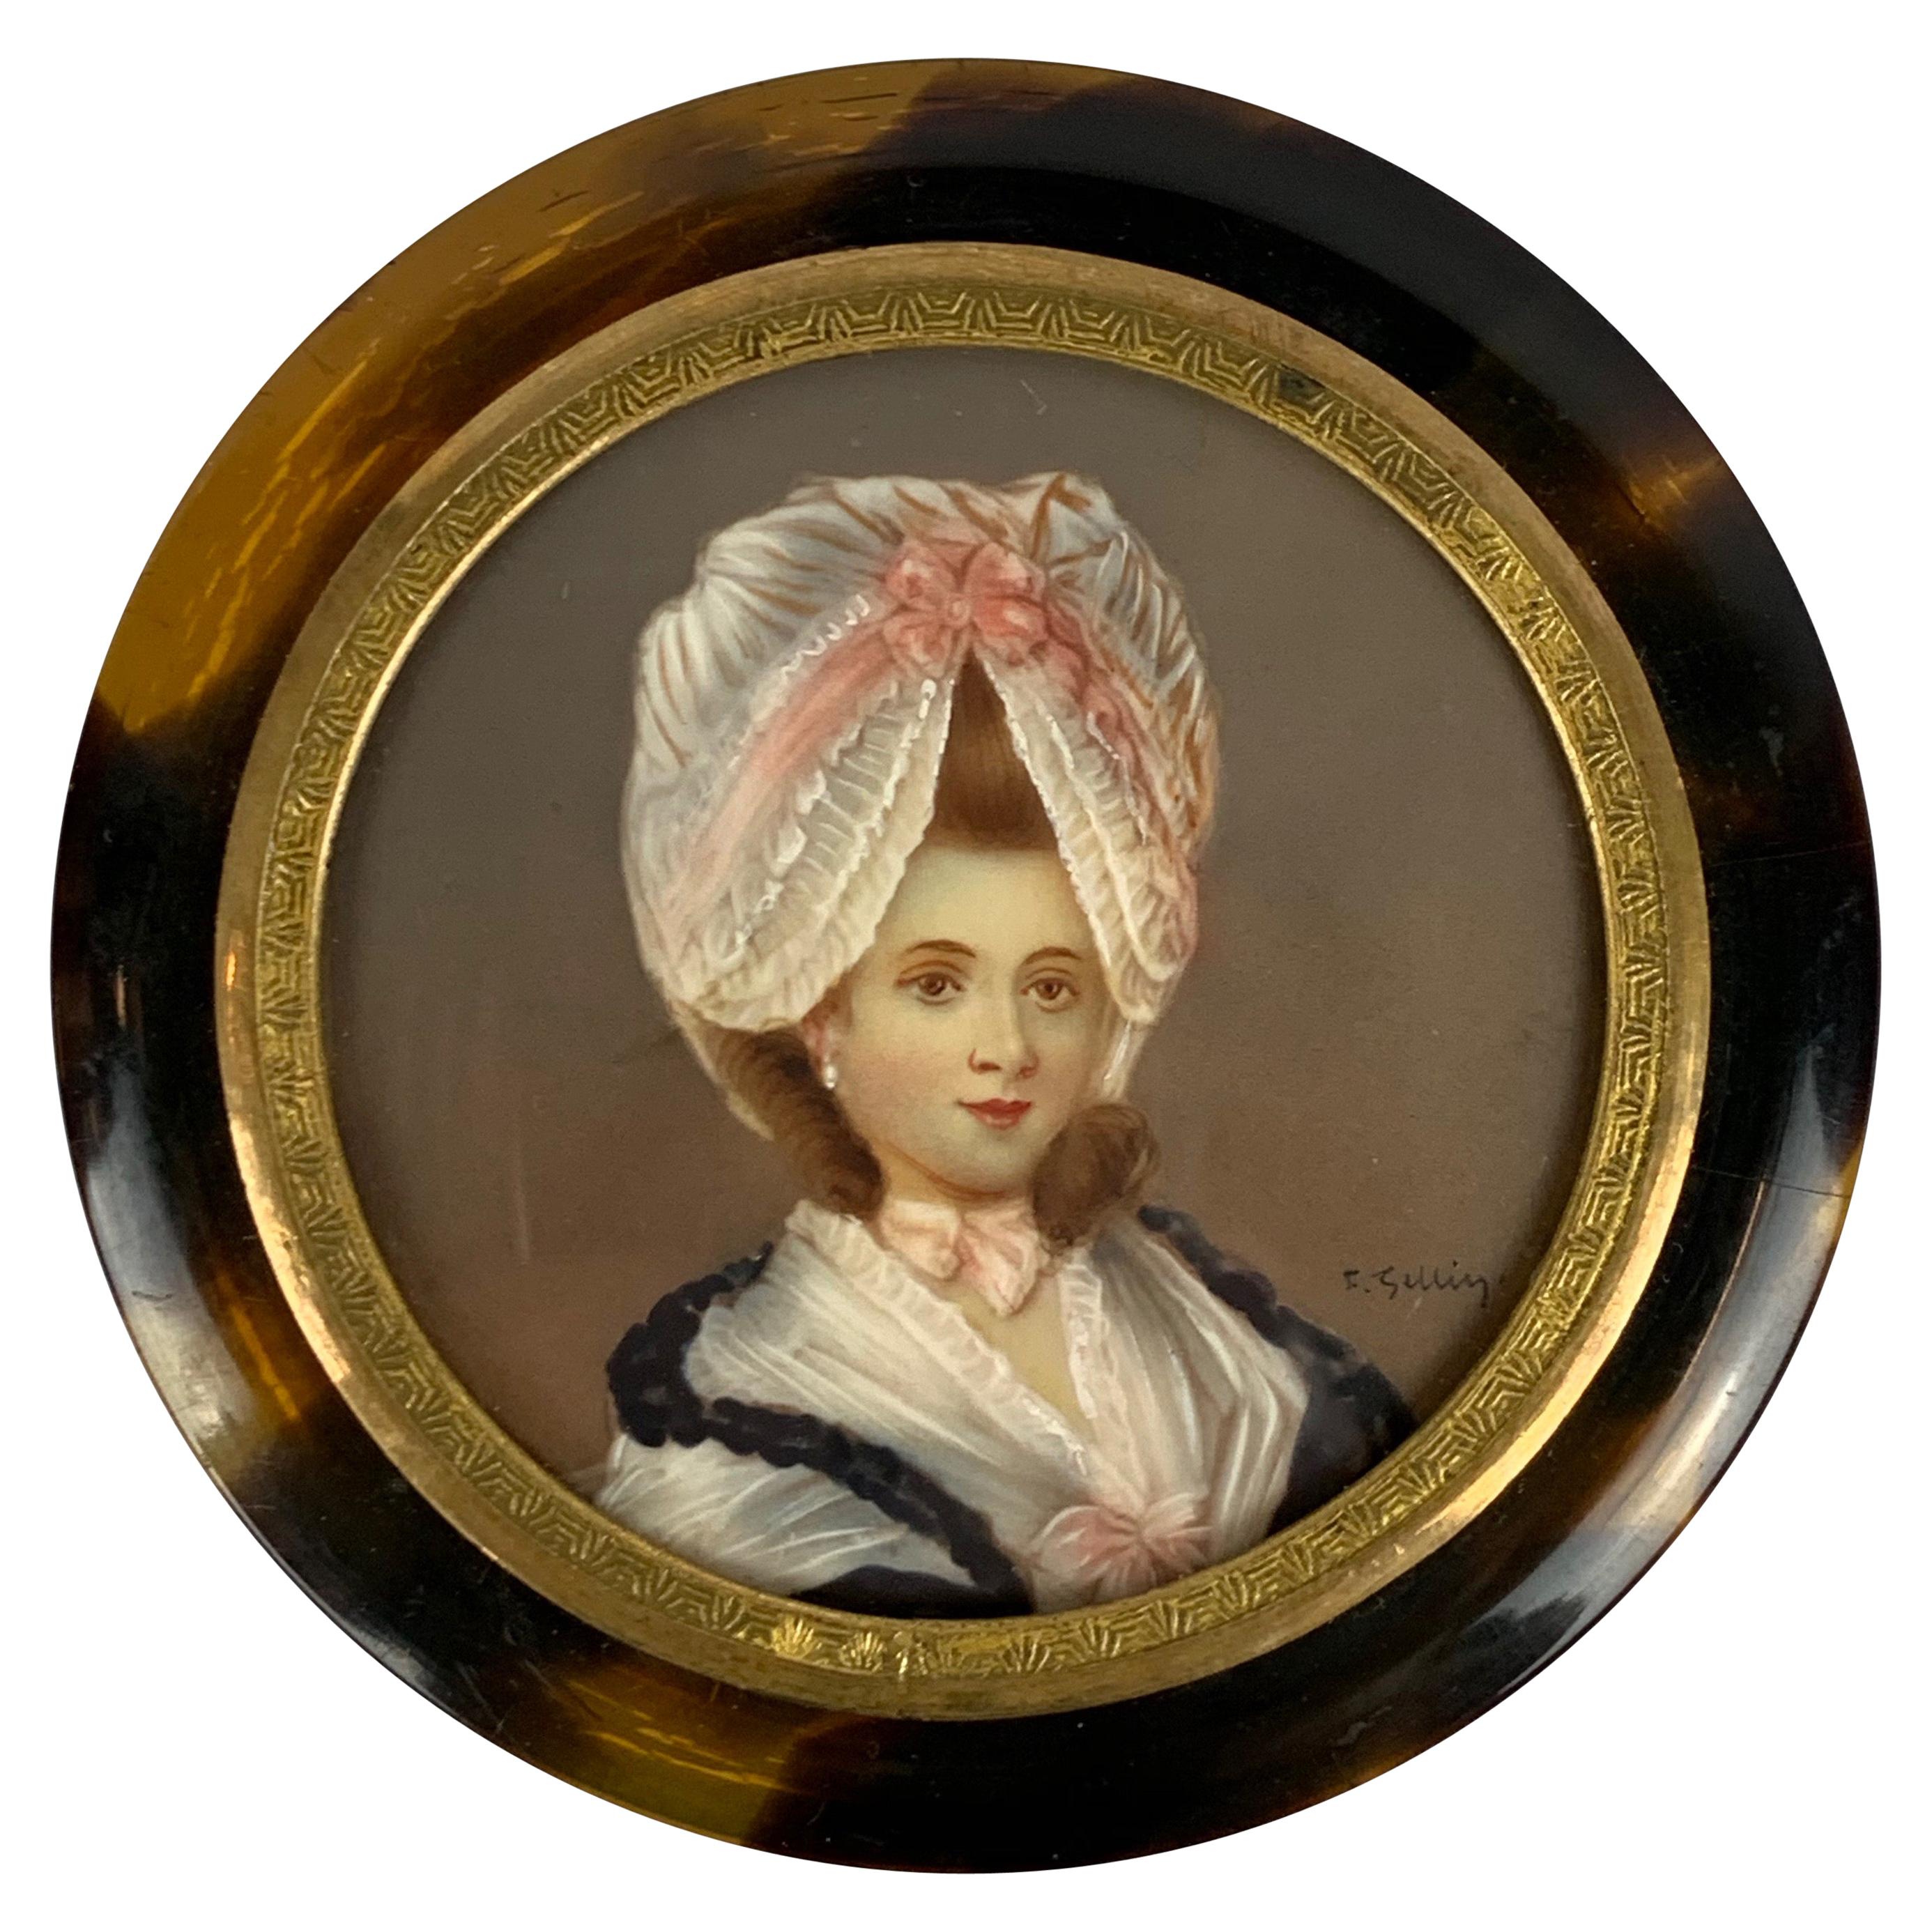 Miniature of a Lady on a Round Snuff Box, Signed-England, 19th c.